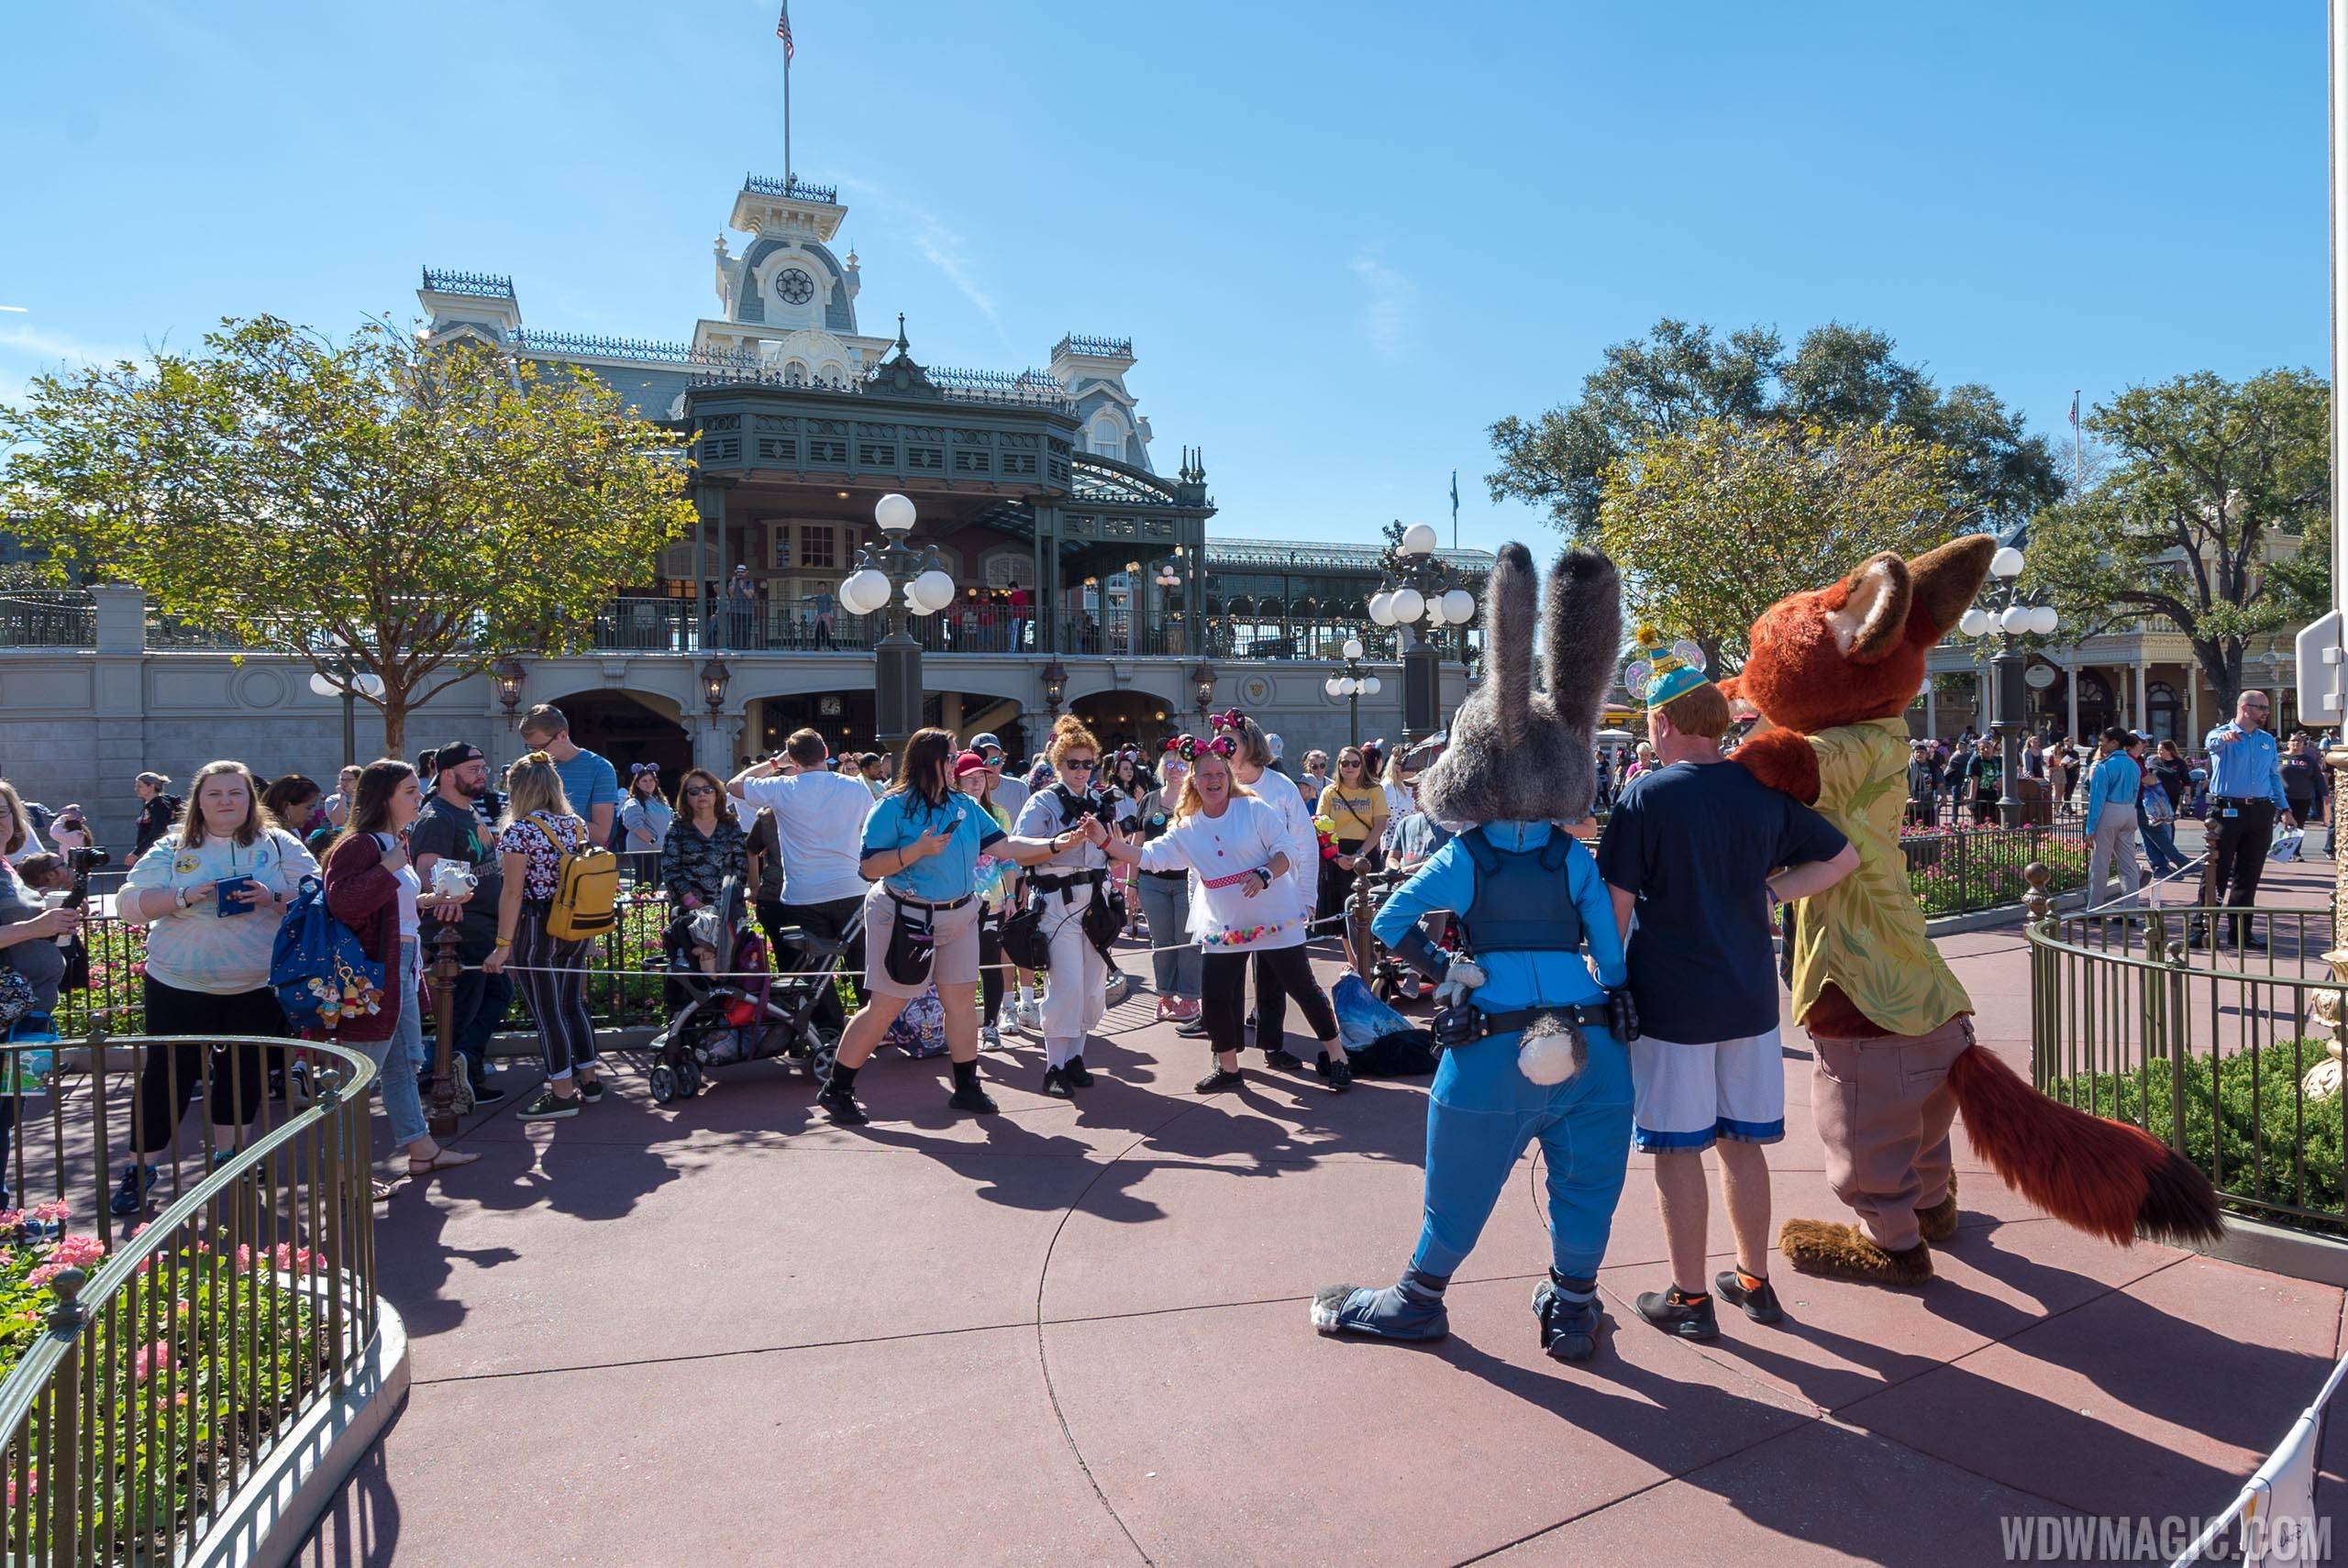 Nick and Judy meet and greet as part of Mickey and Minnie's Surprise Celebration